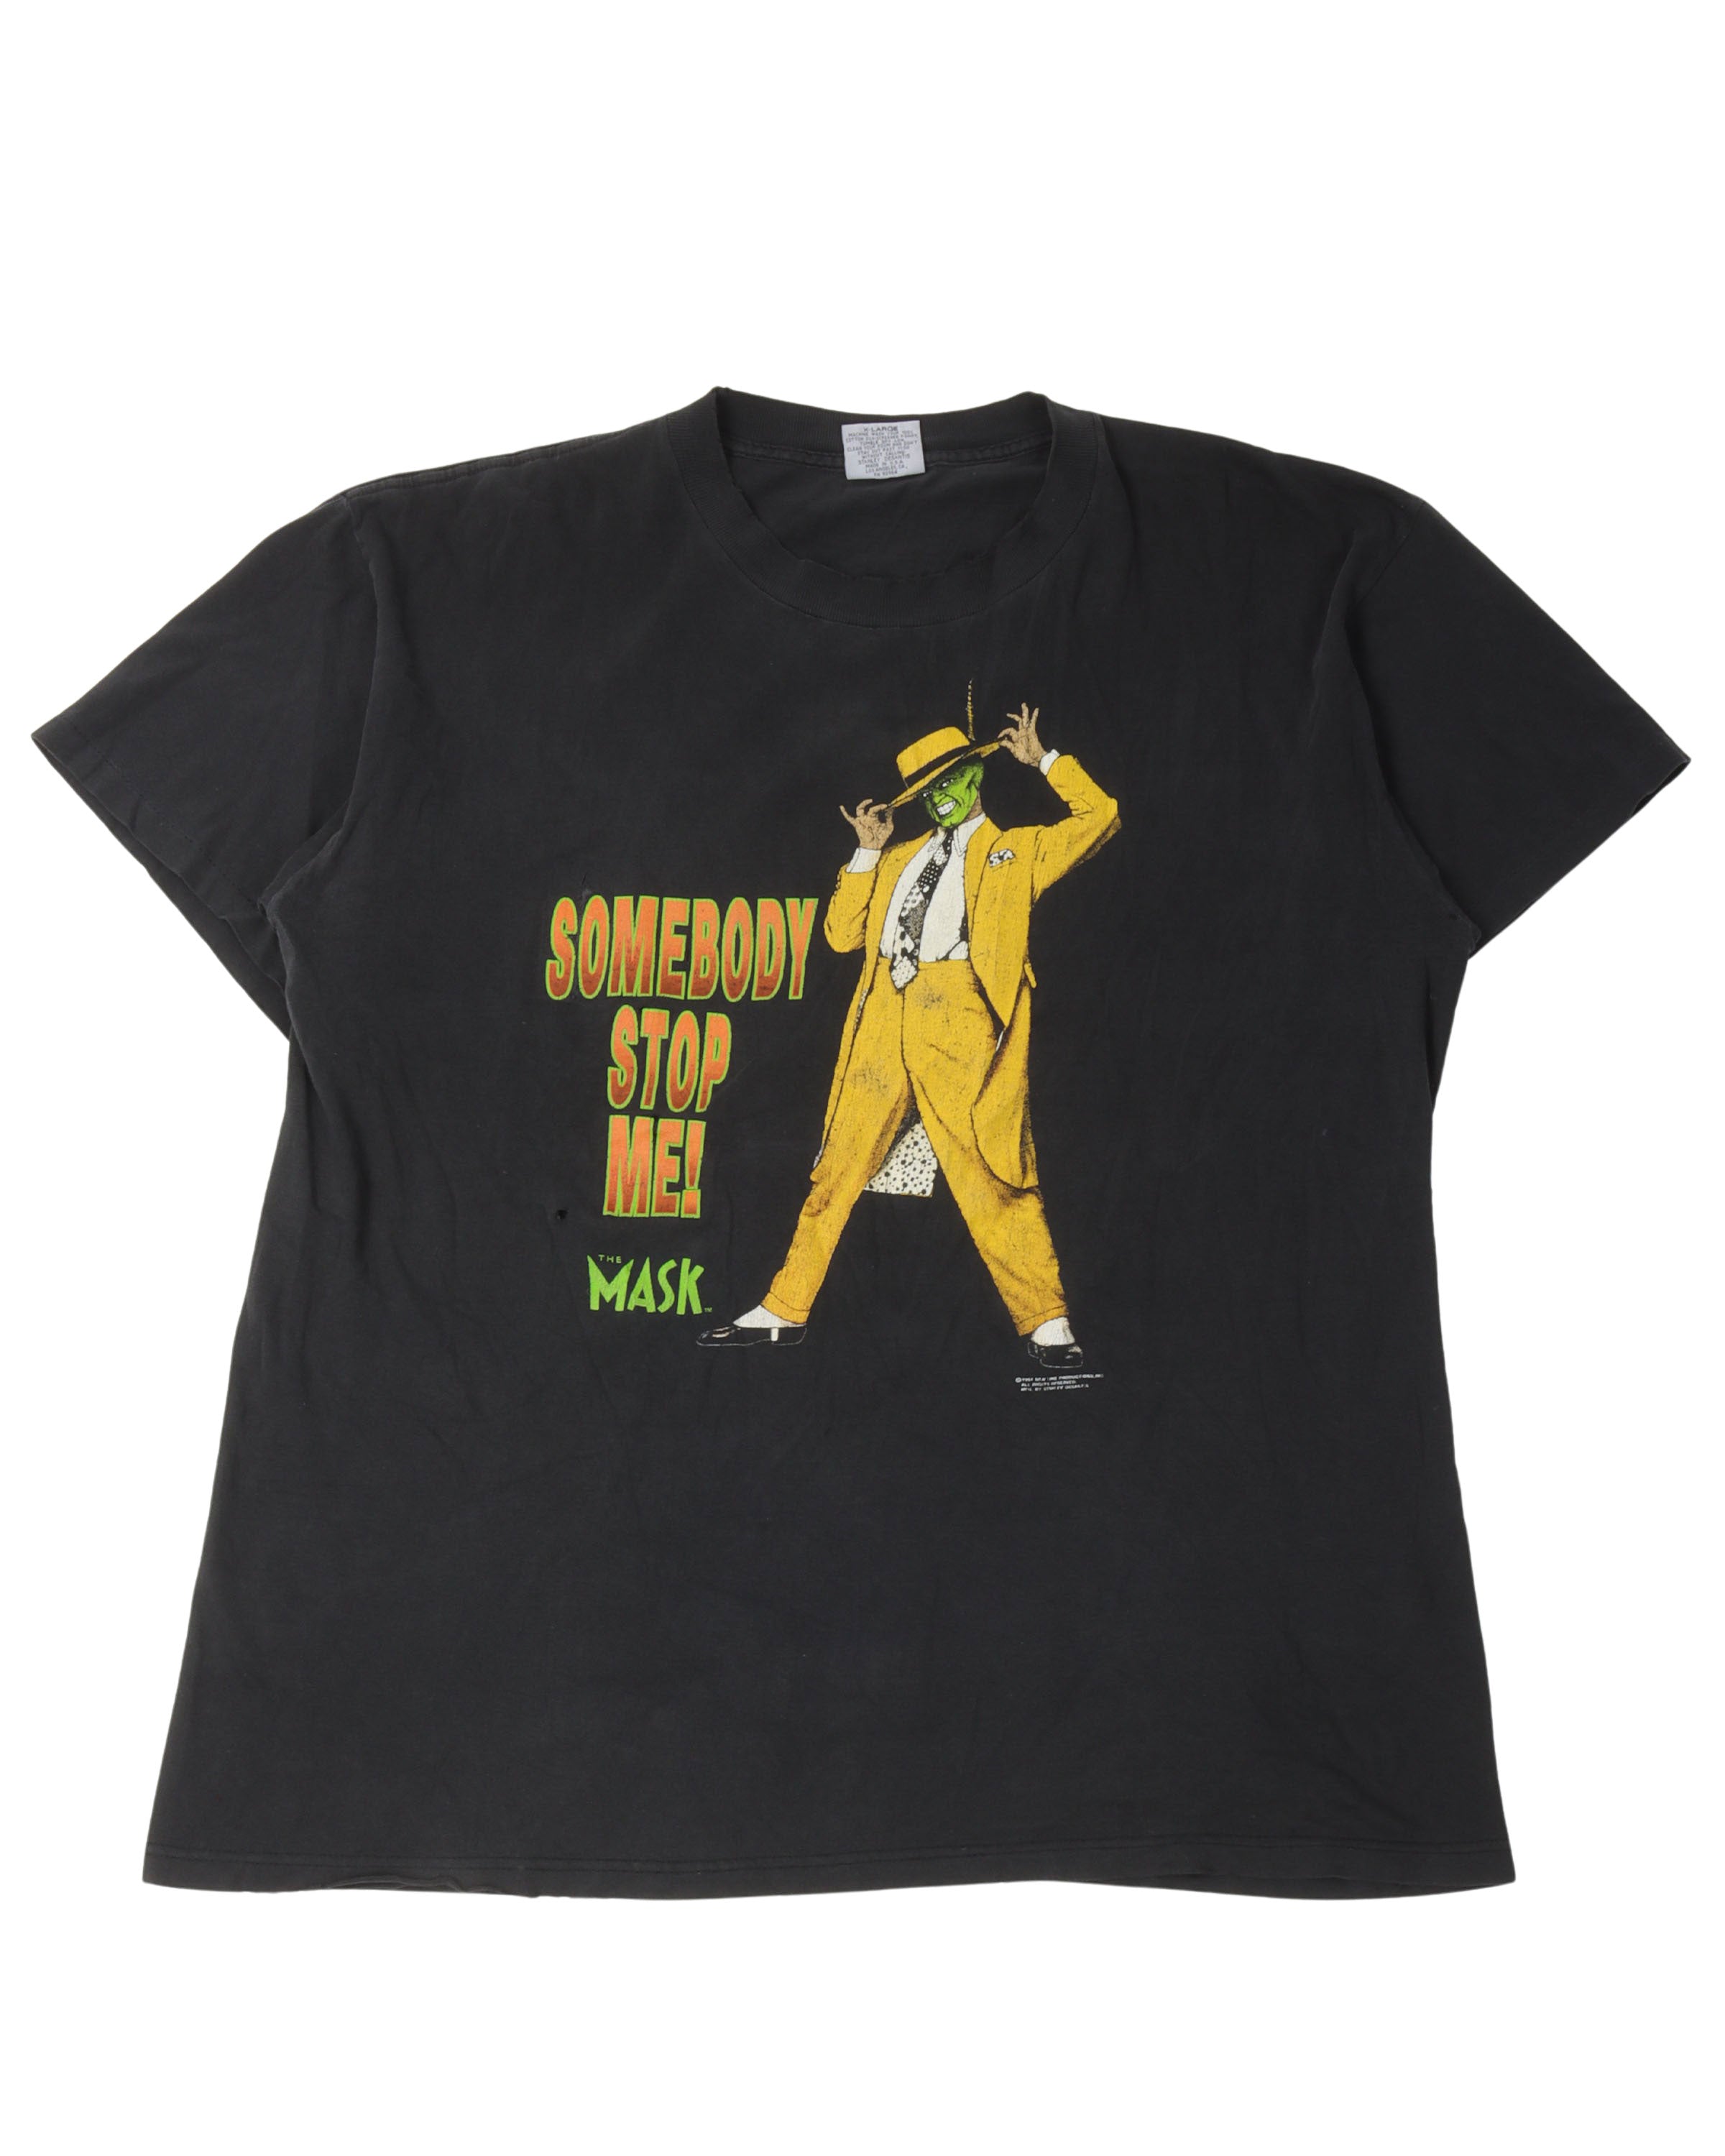 The Mask Somebody Stop Me T-Shirt